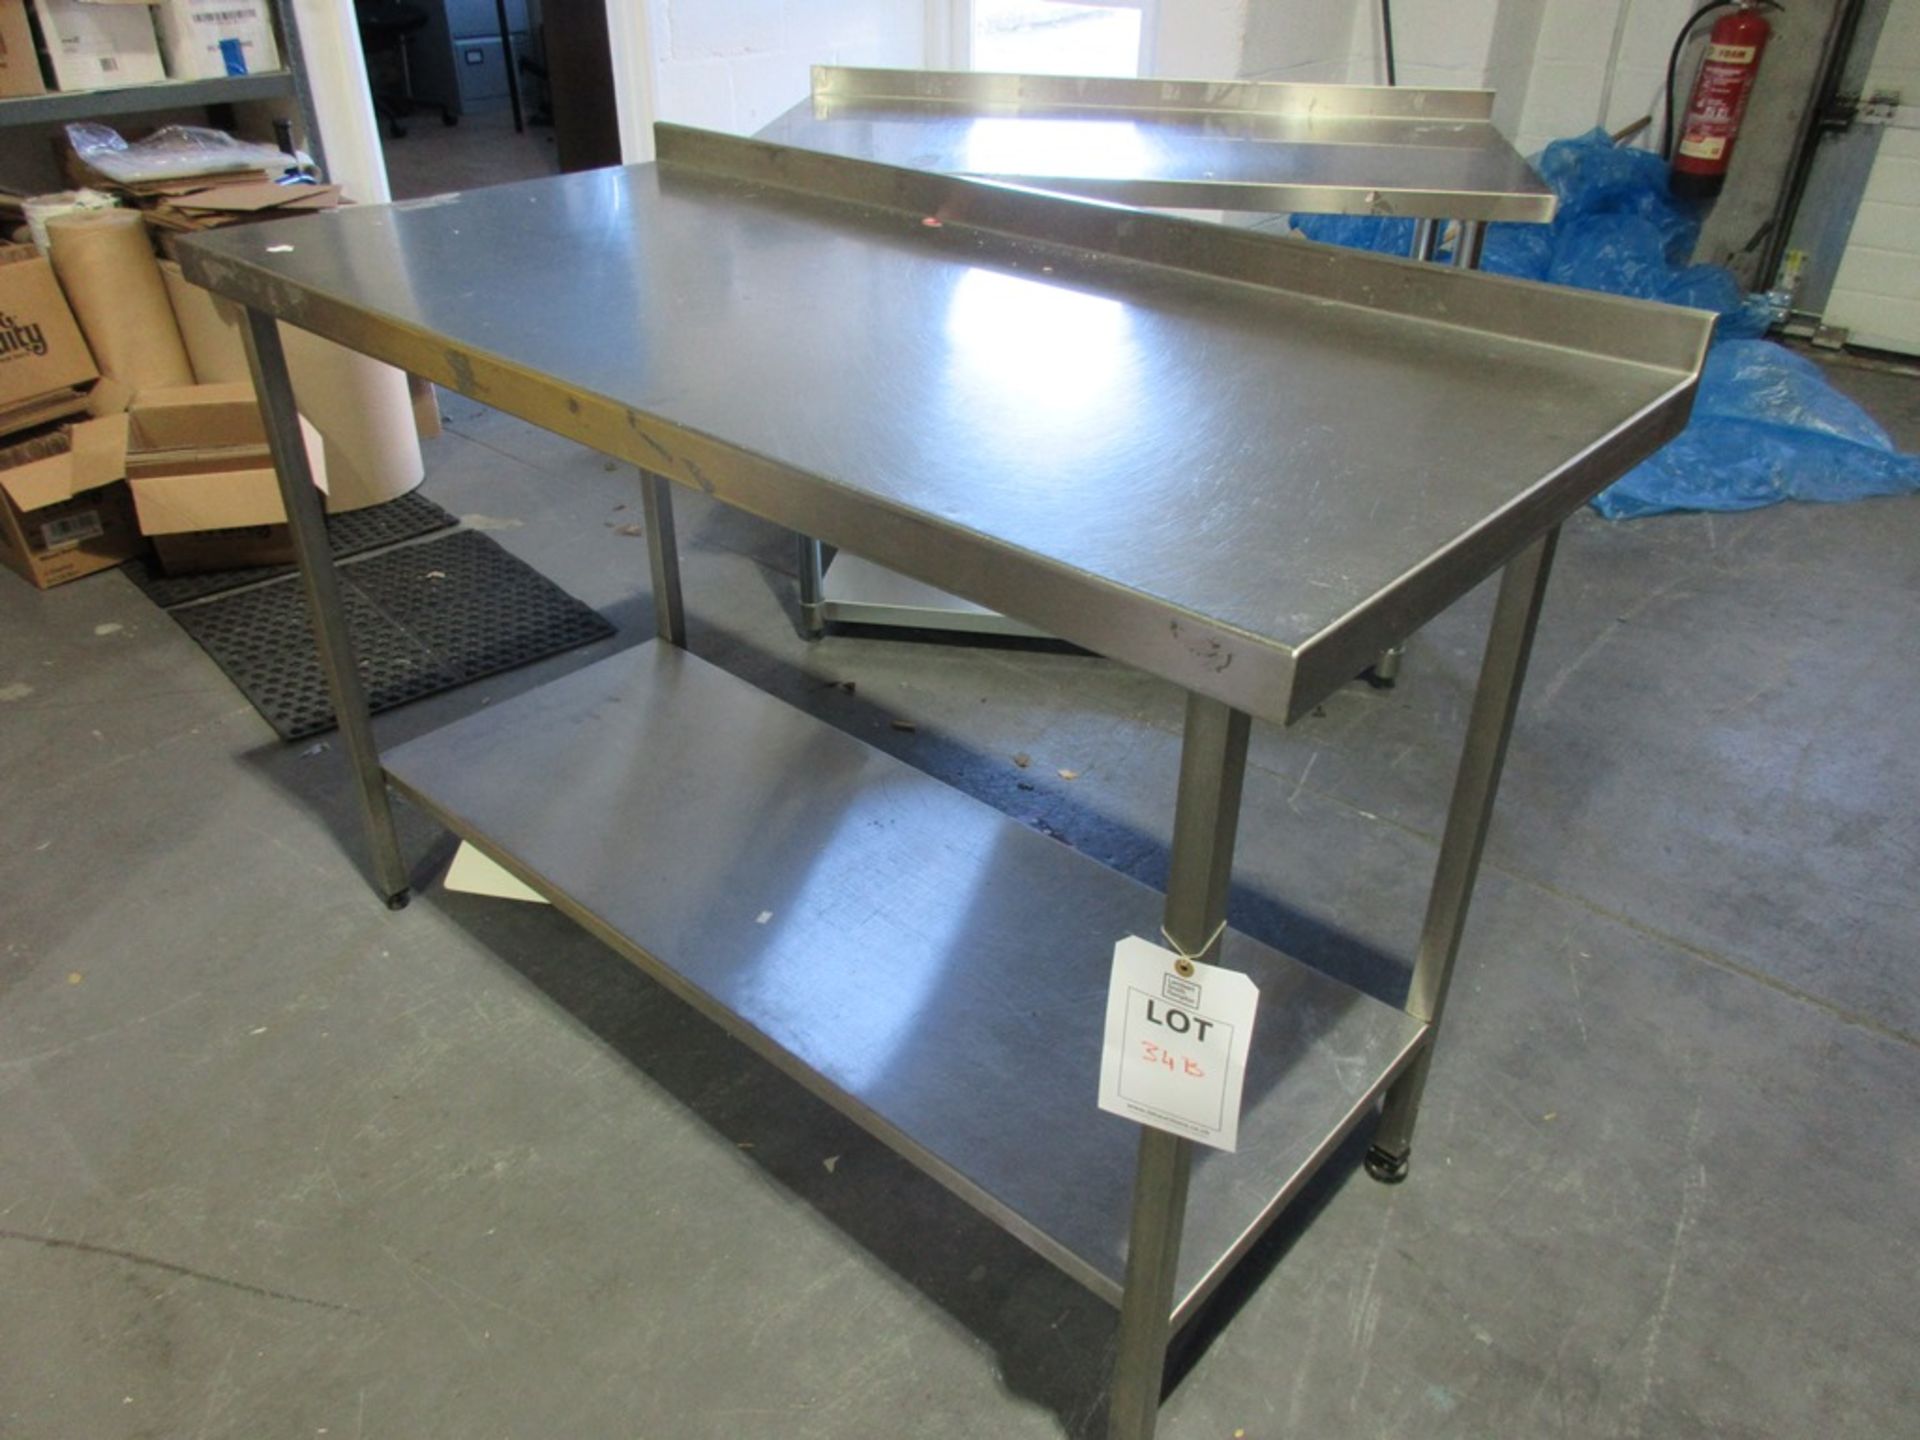 Stainless Steel preparation table with undershelf and splash back, size: 1340mm x 650mm x 900mm